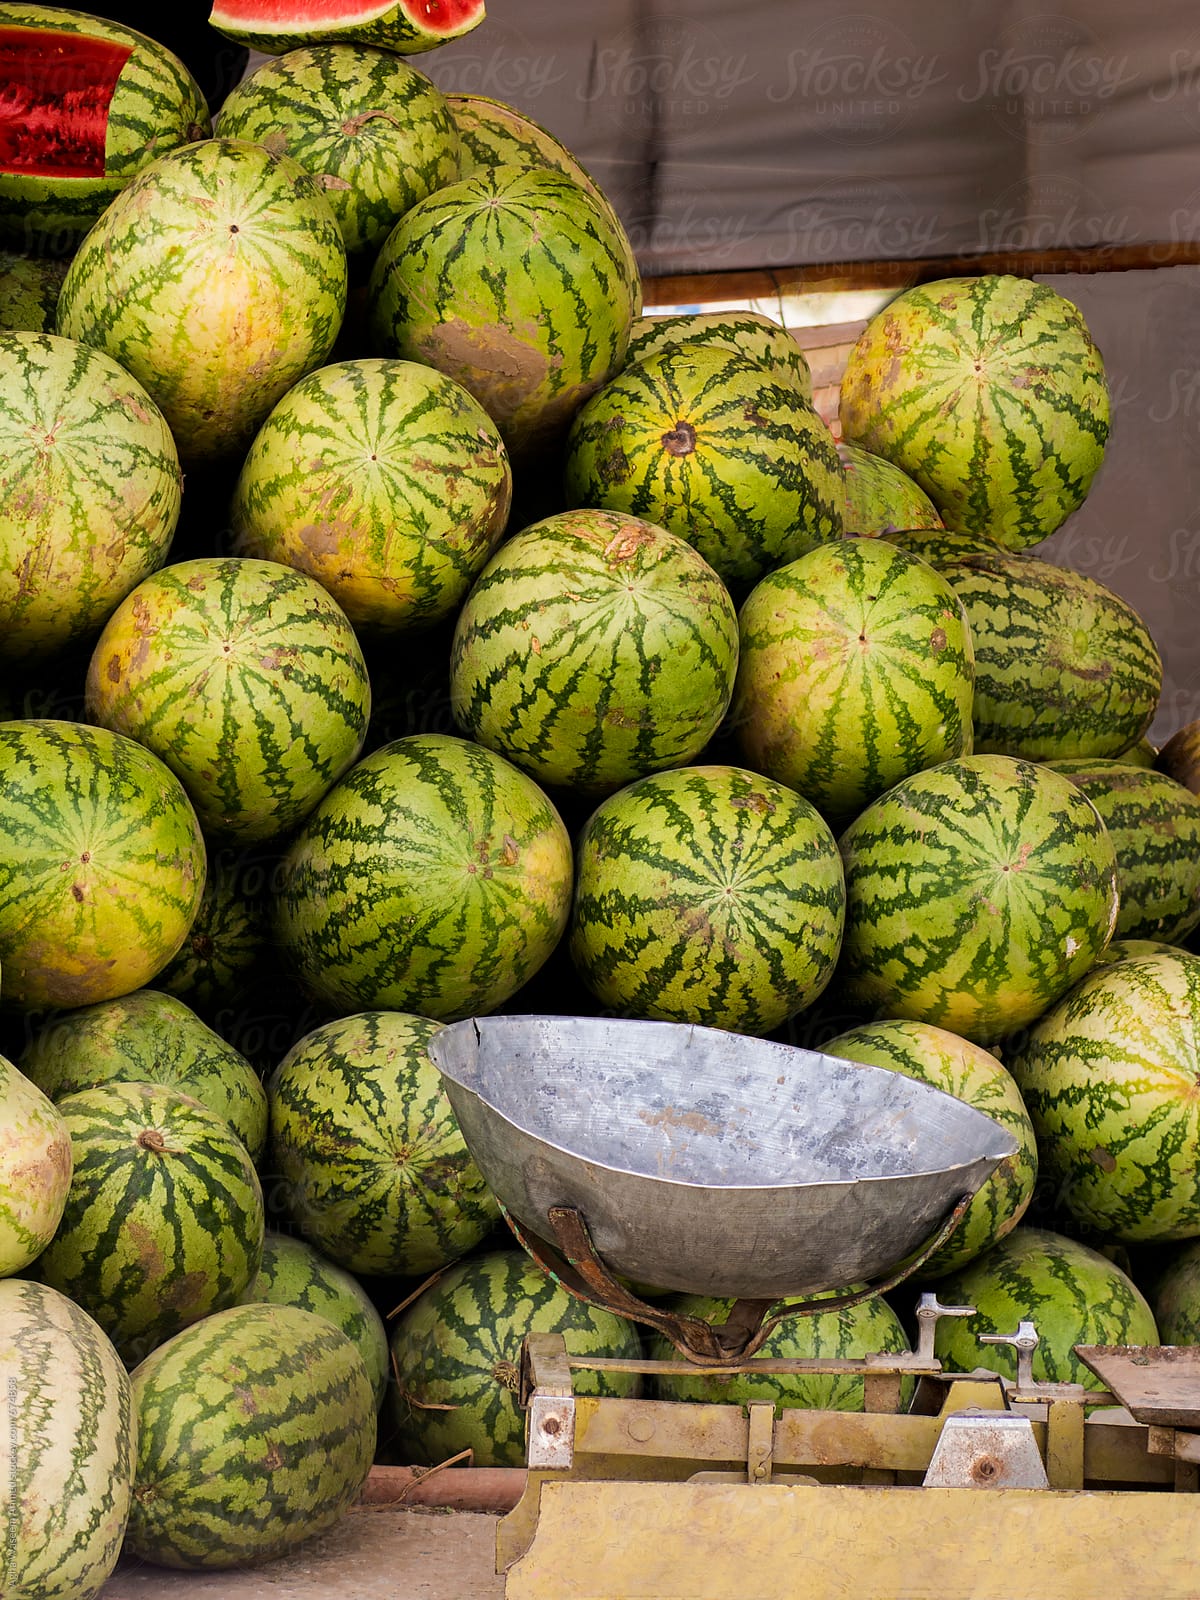 Weighing Machine and Water Melons